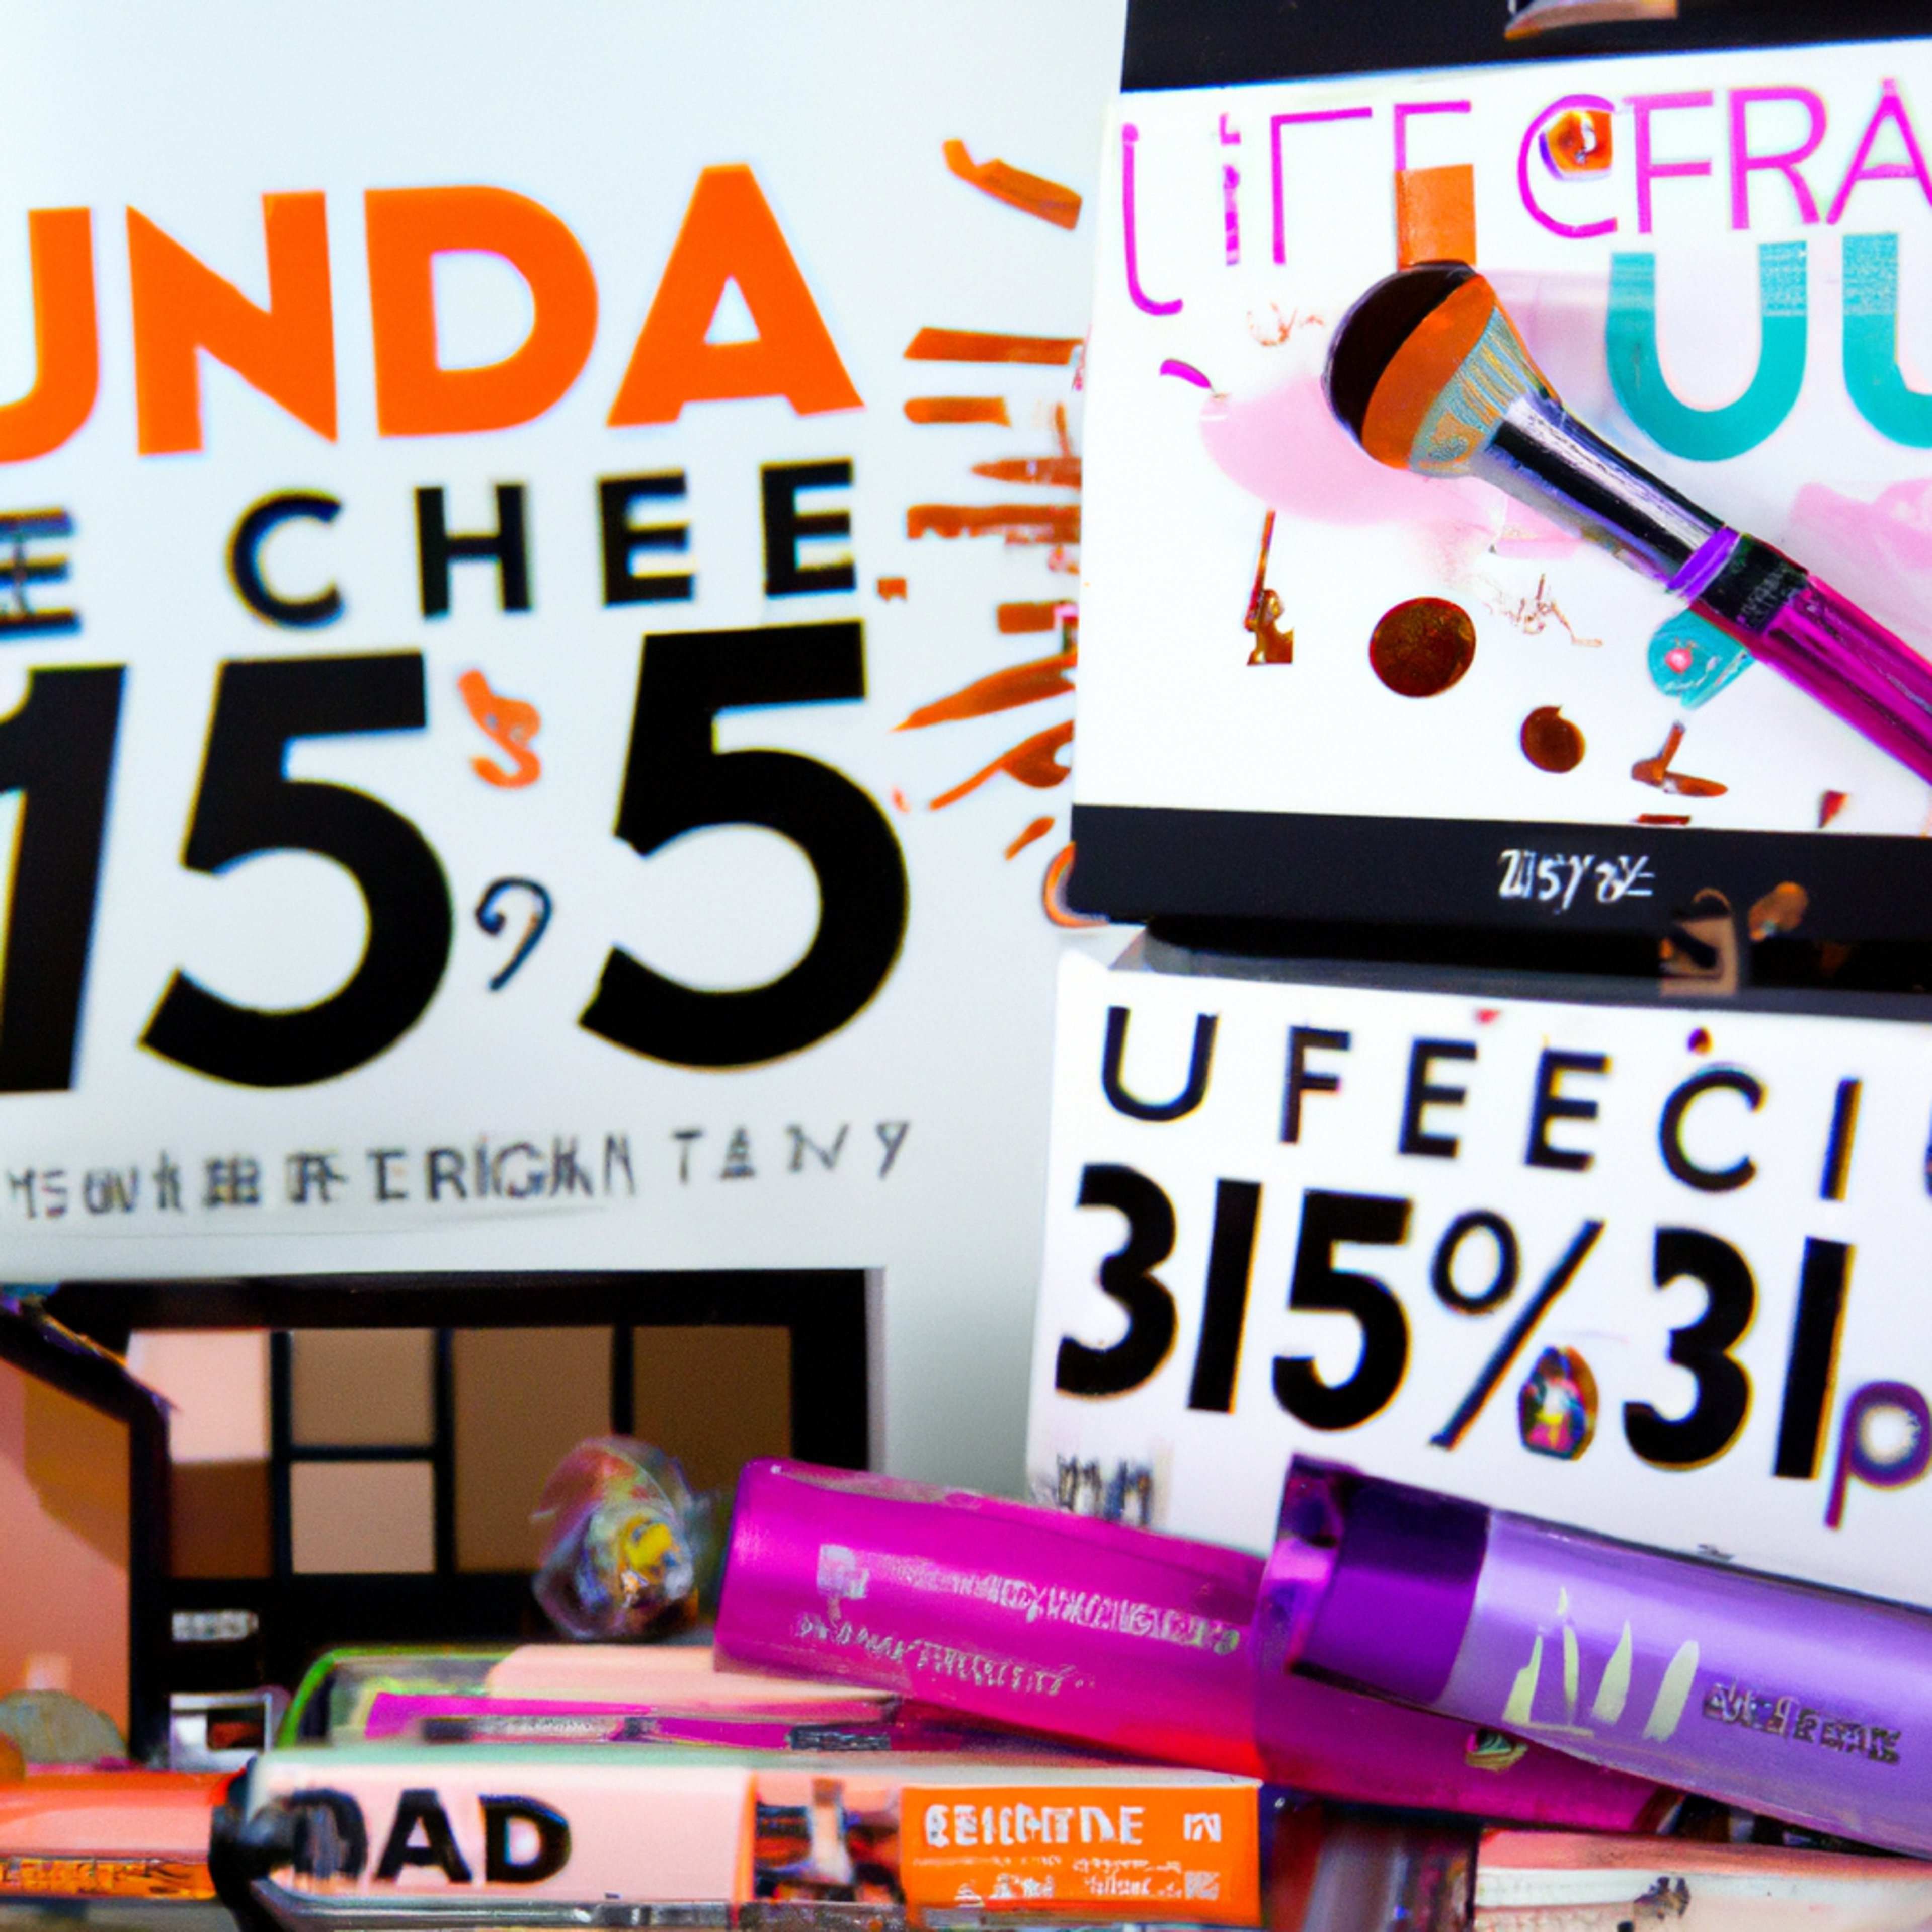 Ulta's 24-Hour Flash Sale Offers 50% Discount on Clinique, Urban Decay, and More